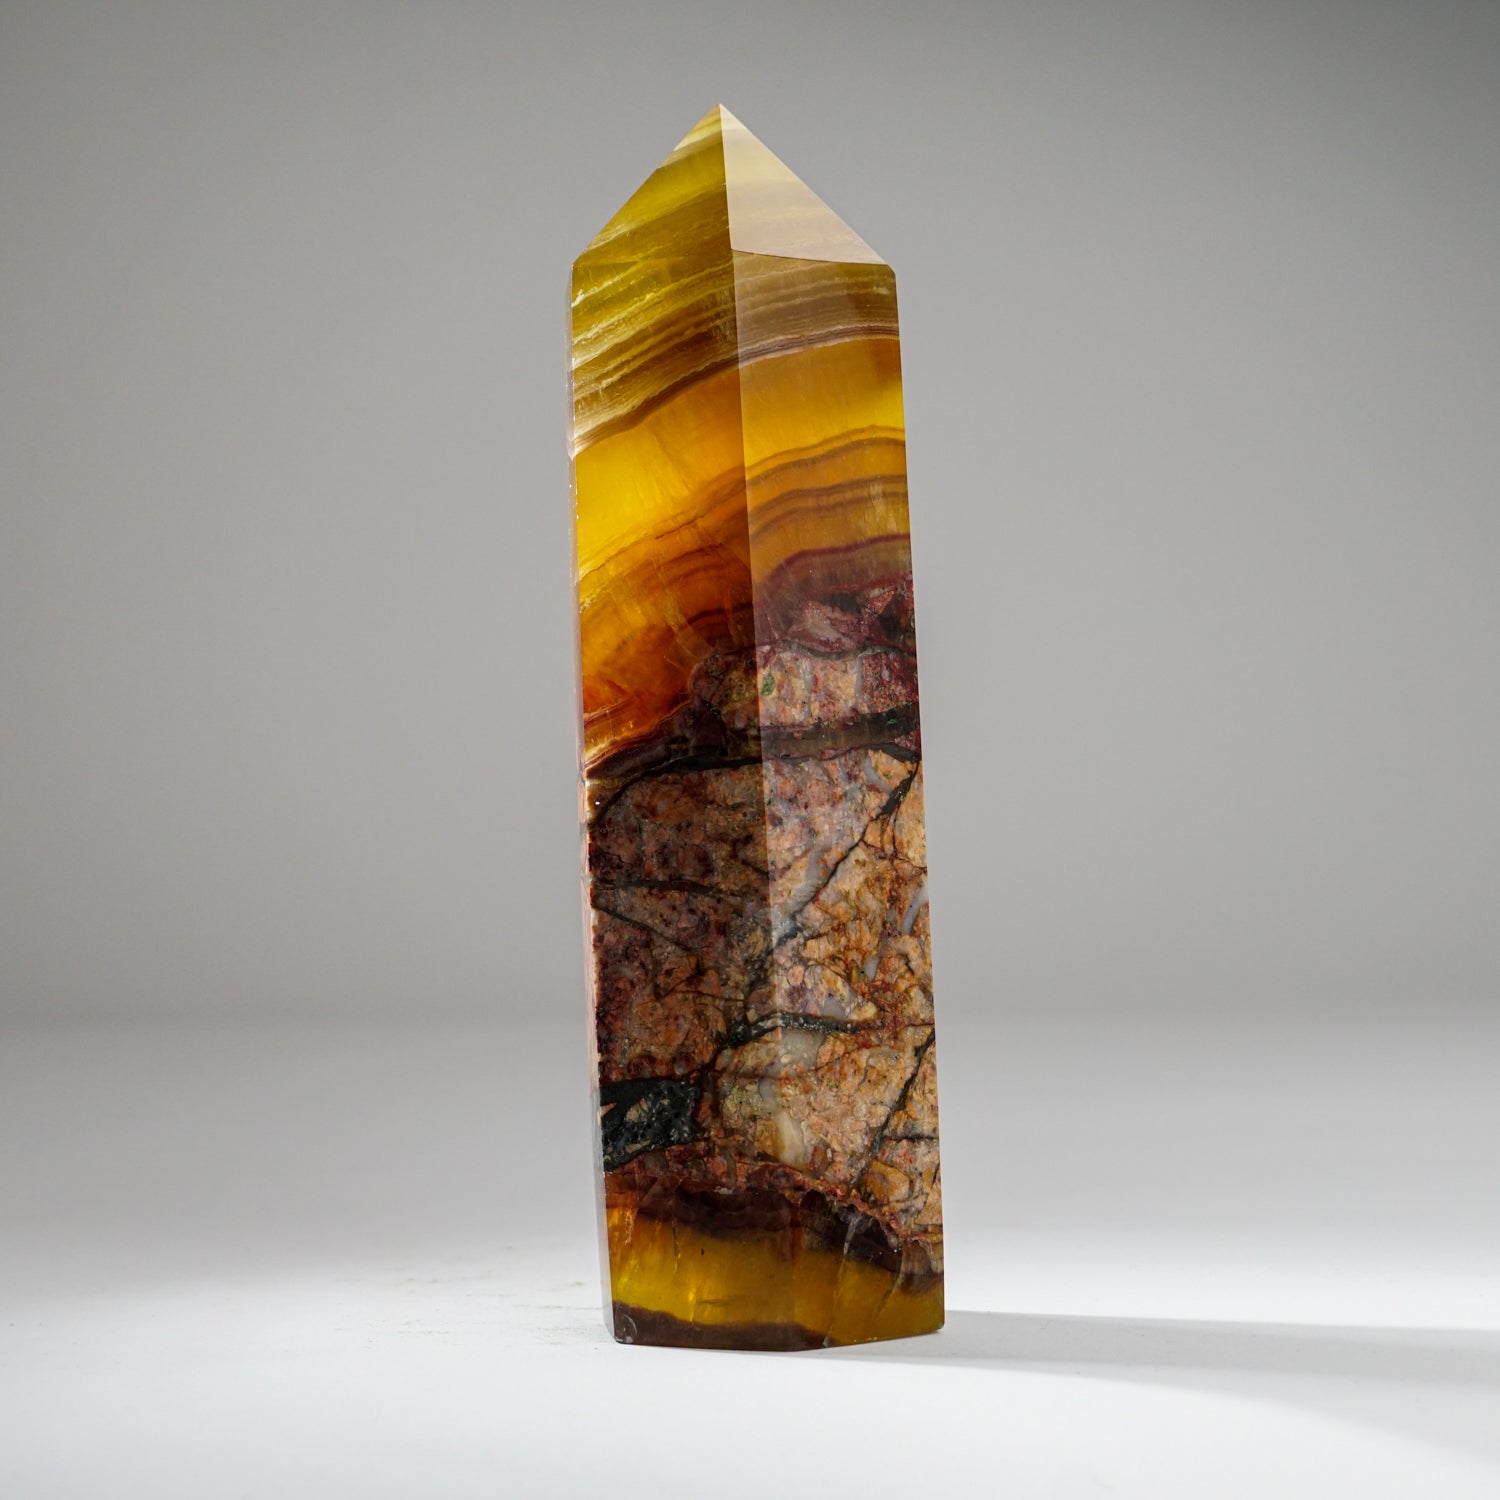 Genuine Polished Yellow Fluorite Point from Argentina (2.2 lbs)